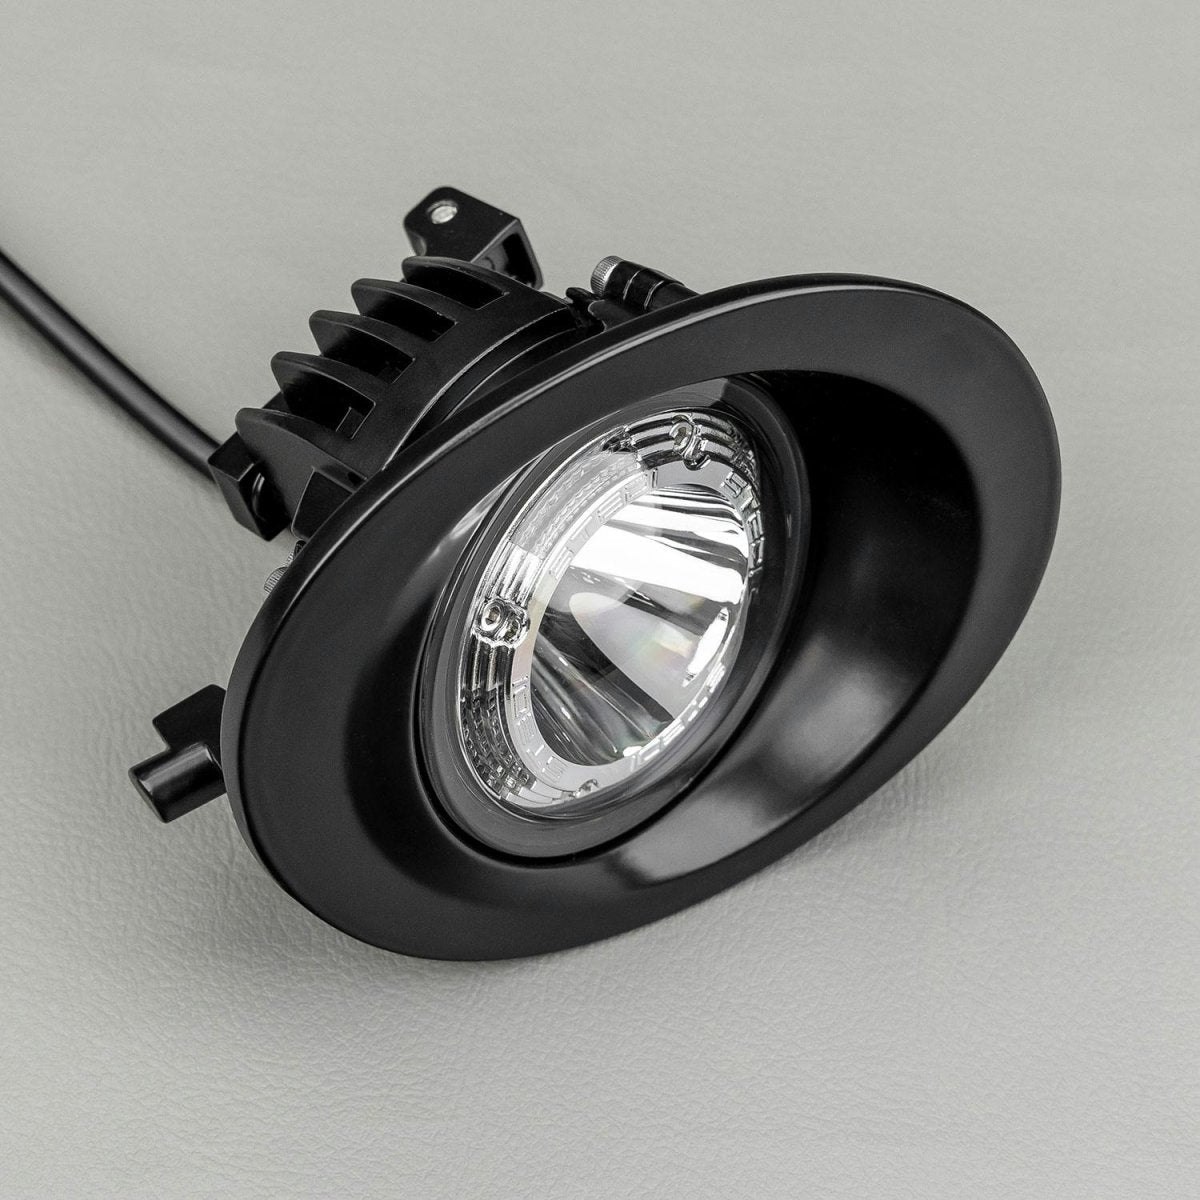 STEDI Boost Integrated Driving Light For ARB Summit - NZ Offroader